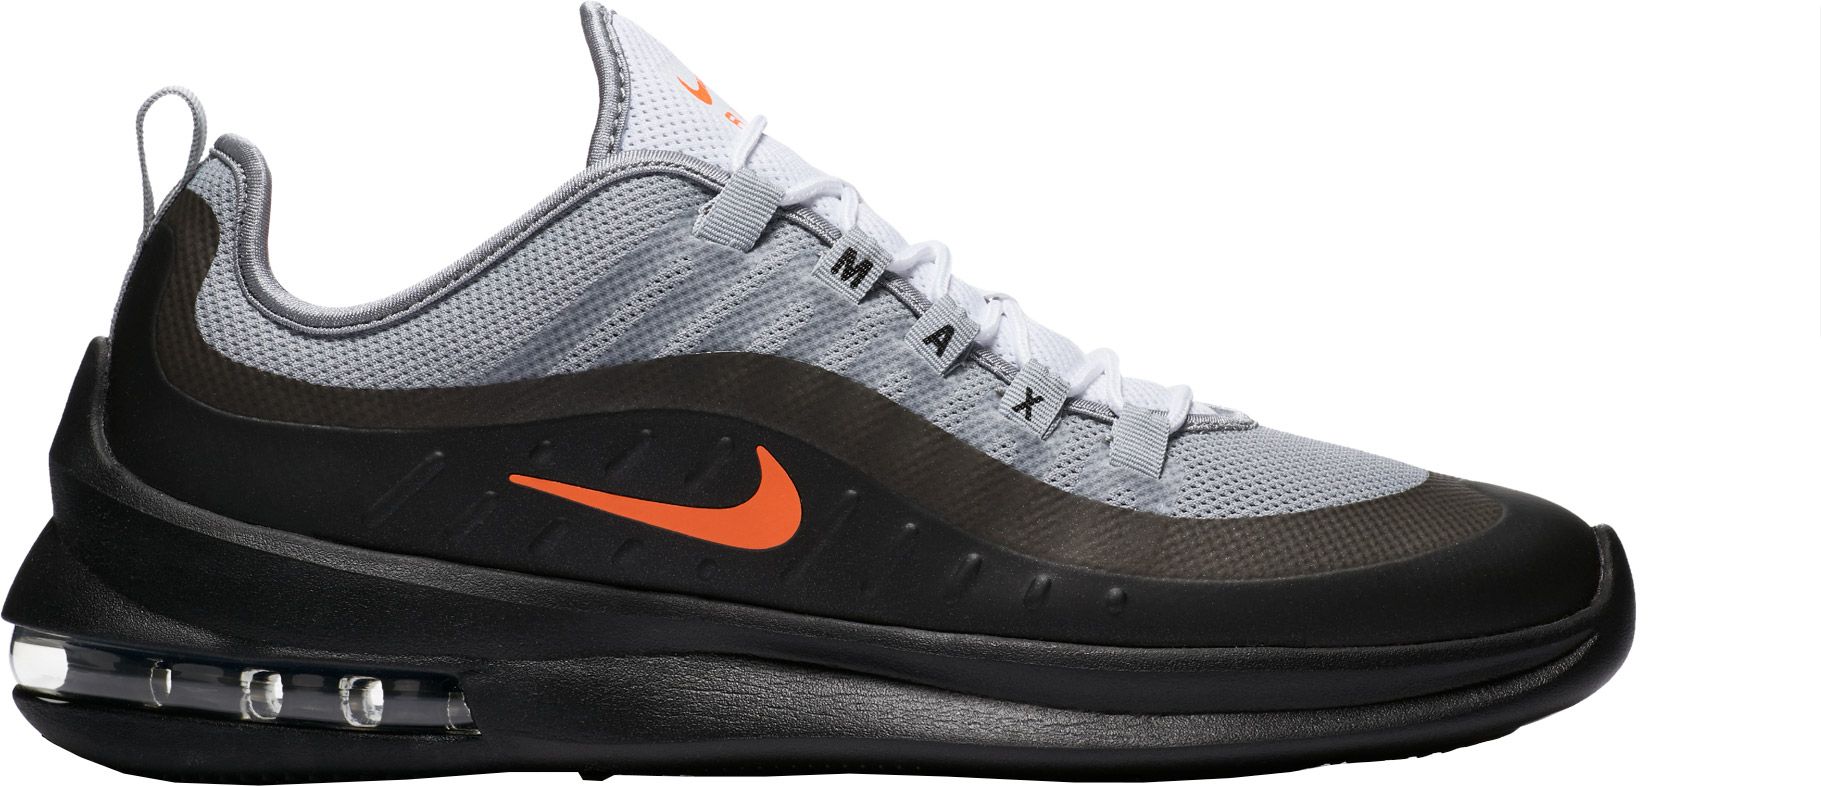 Nike Air Max Axis Shoes | Best Price Guarantee at DICK'S